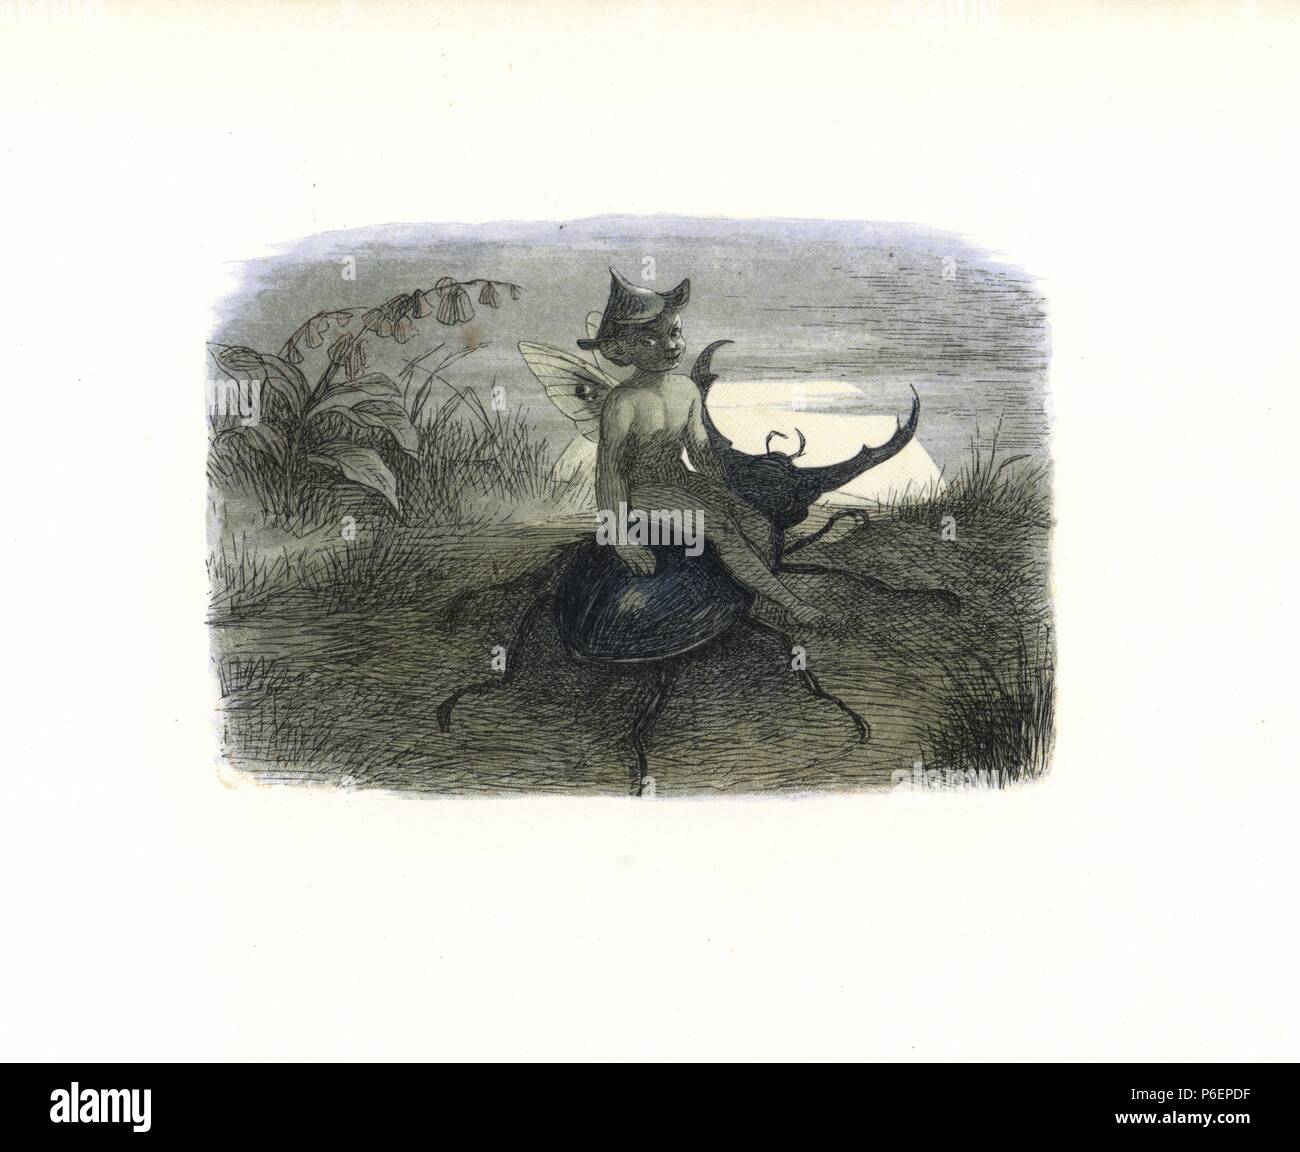 The fairy queen's messenger riding on a stag beetle. Handcoloured woodblock print by Edmund Evans after an illustration by Richard Doyle from In Fairyland, a series of Pictures from the Elf World, Longman, London, 1870. Stock Photo